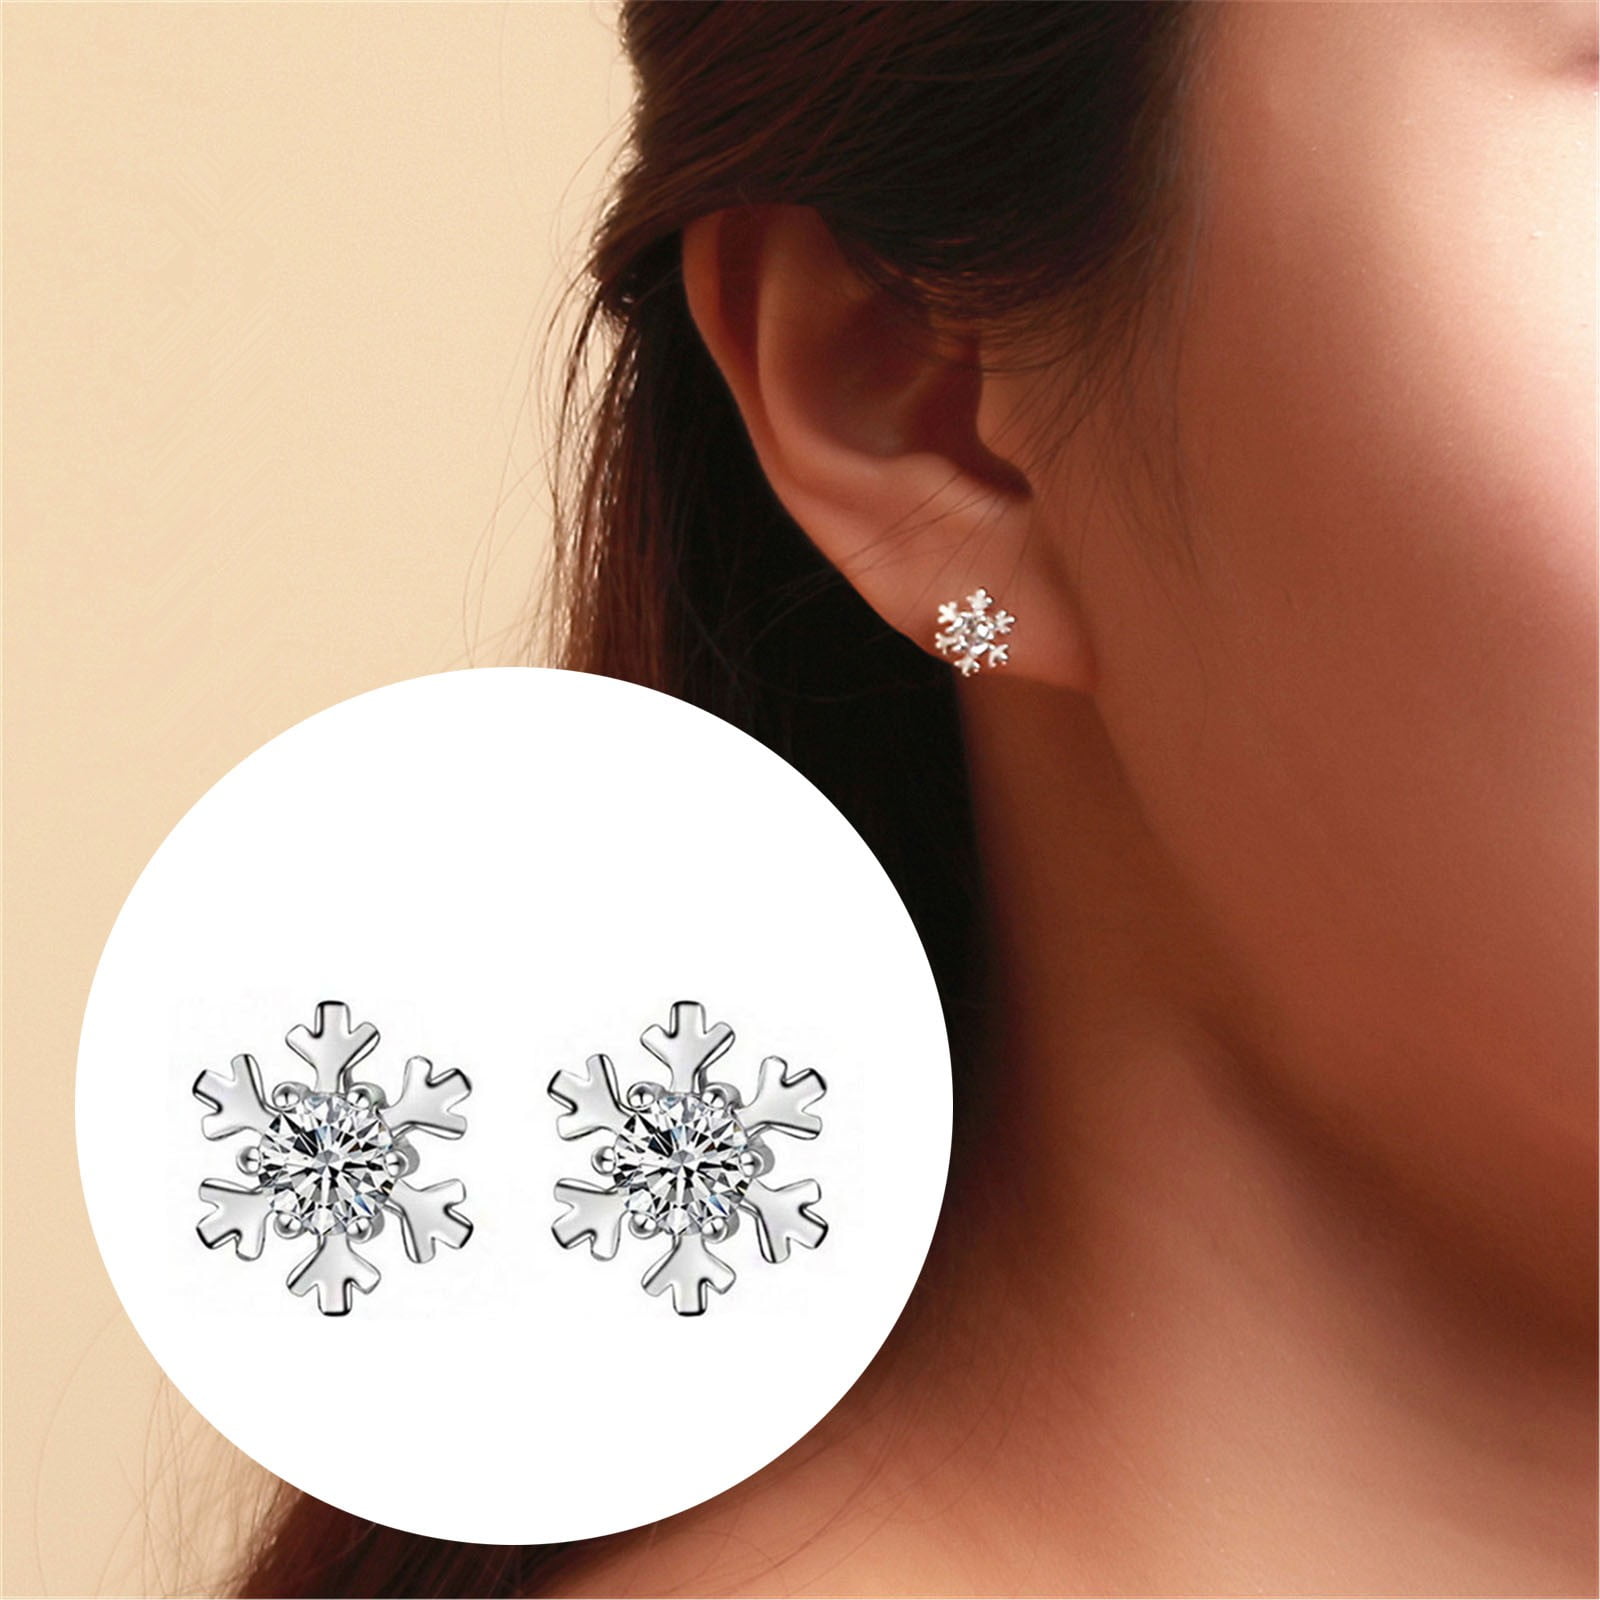 Buy Silver Snowflake Stud Earring Online - Accessorize India